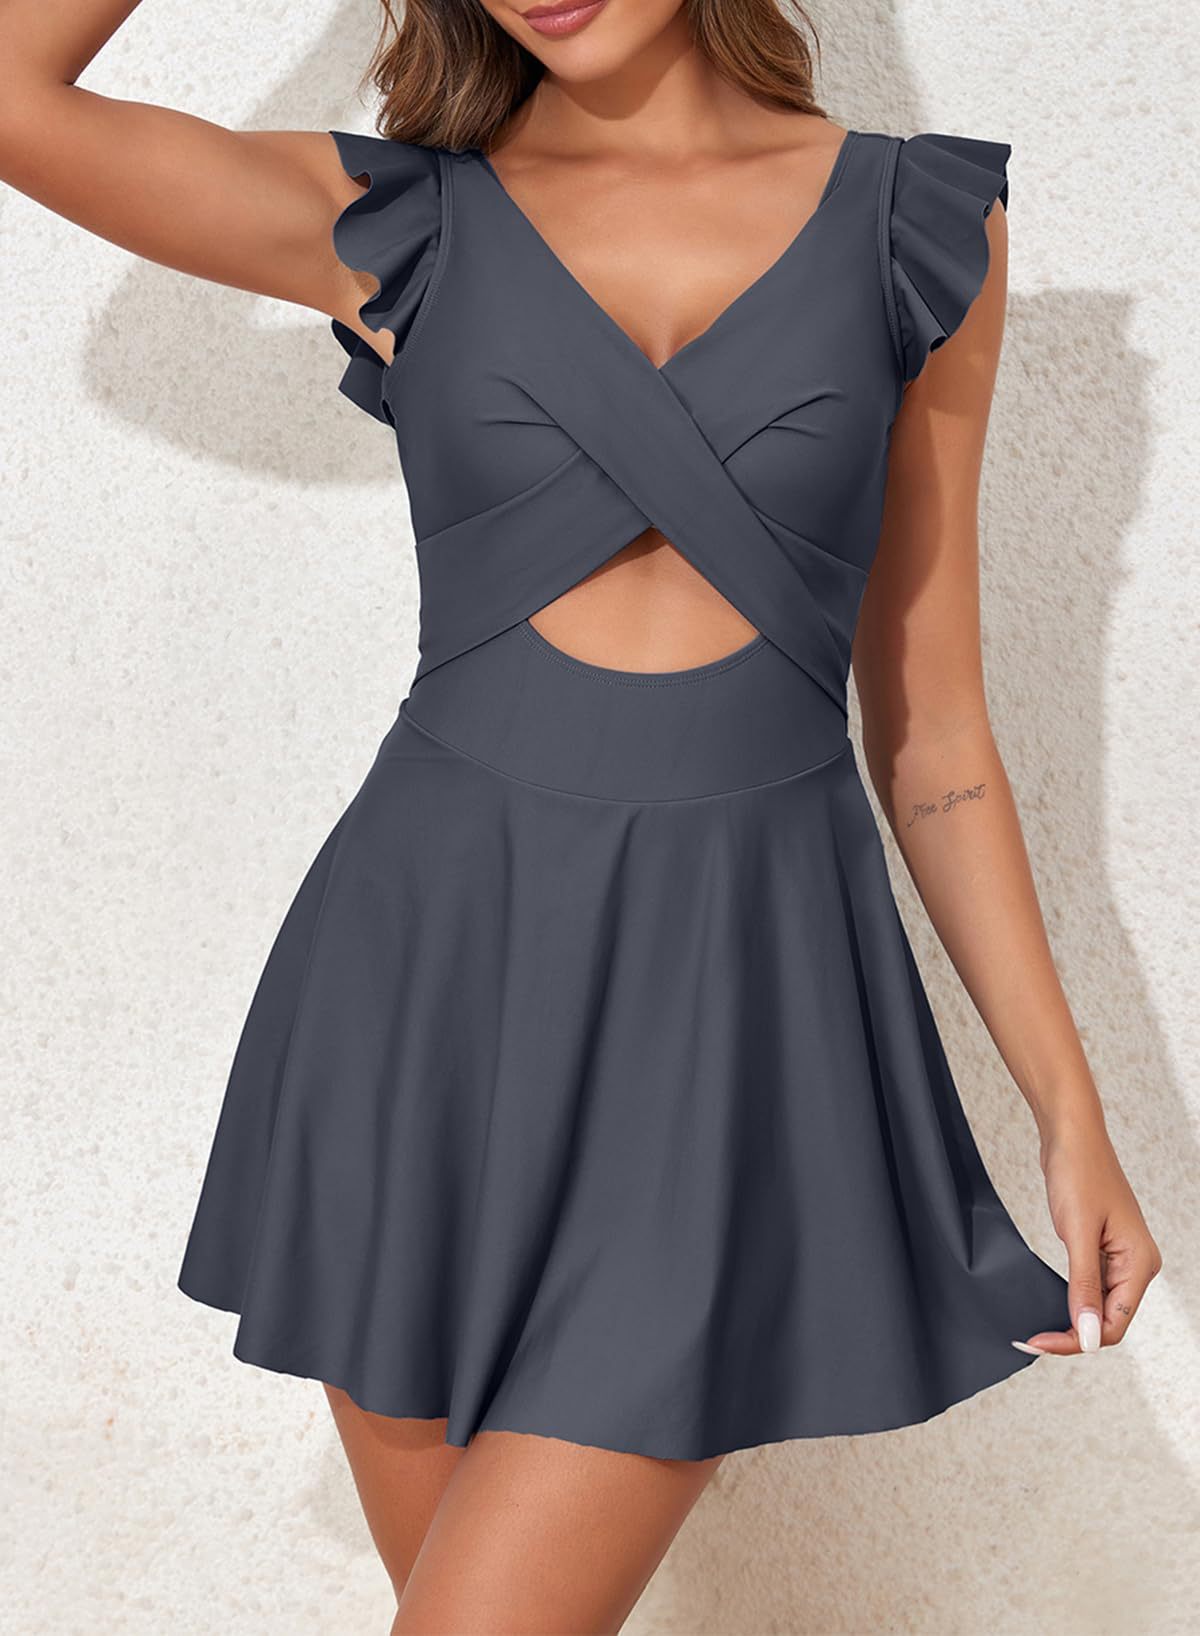 Solid Color Skirted One-piece Swimsuit Ruffle Hem Backless V Neck Swimsuit Dress